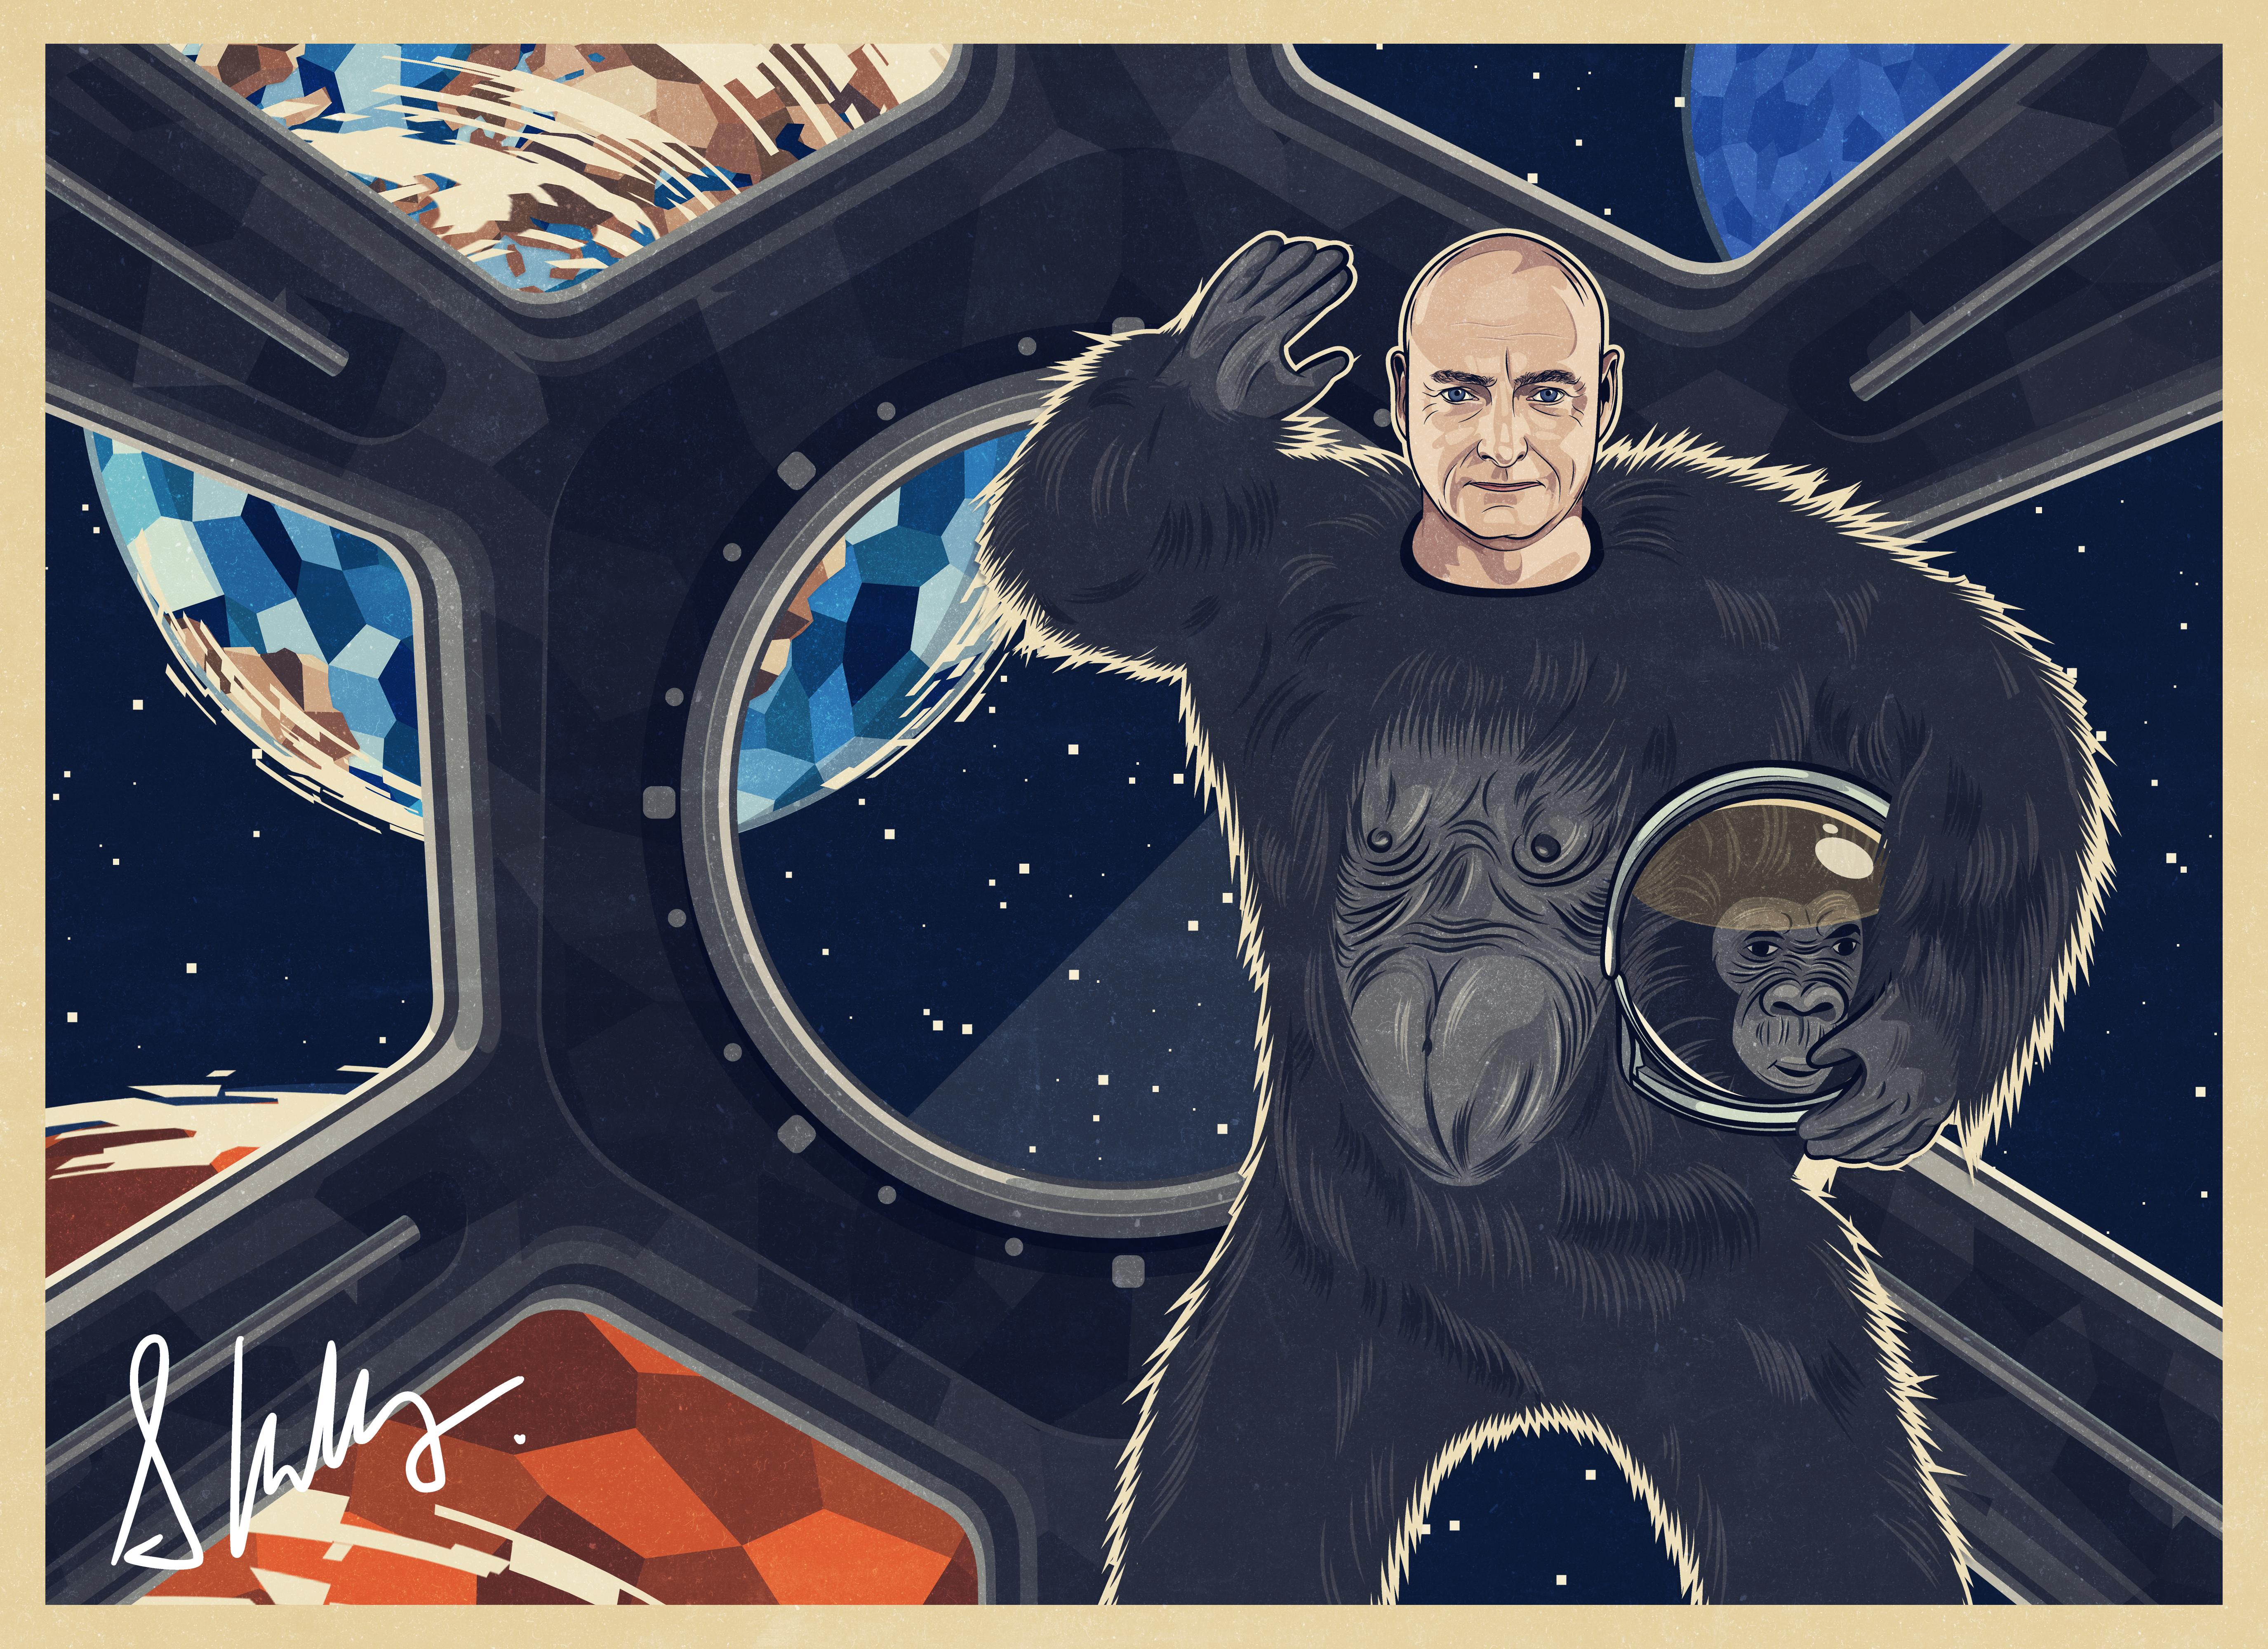 Scott Kelly wore a gorilla costume on the International Space Station, a former NASA pilot, as shown in this episode from his recent NFT fall. 